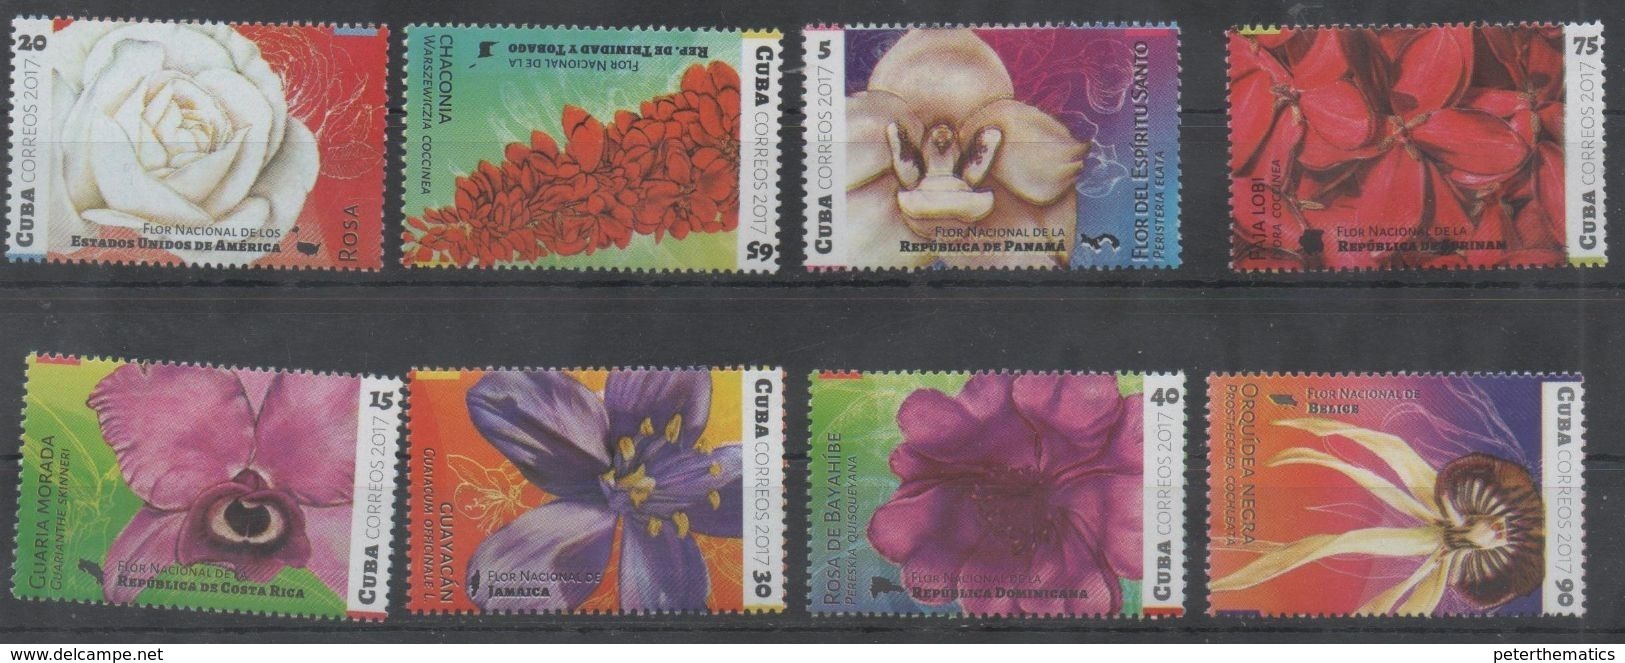 FLORA , 2017, MNH, NATIONAL FLOWERS OF THE AMERICAS, ROSES, ORCHIDS, 8v - Orchids